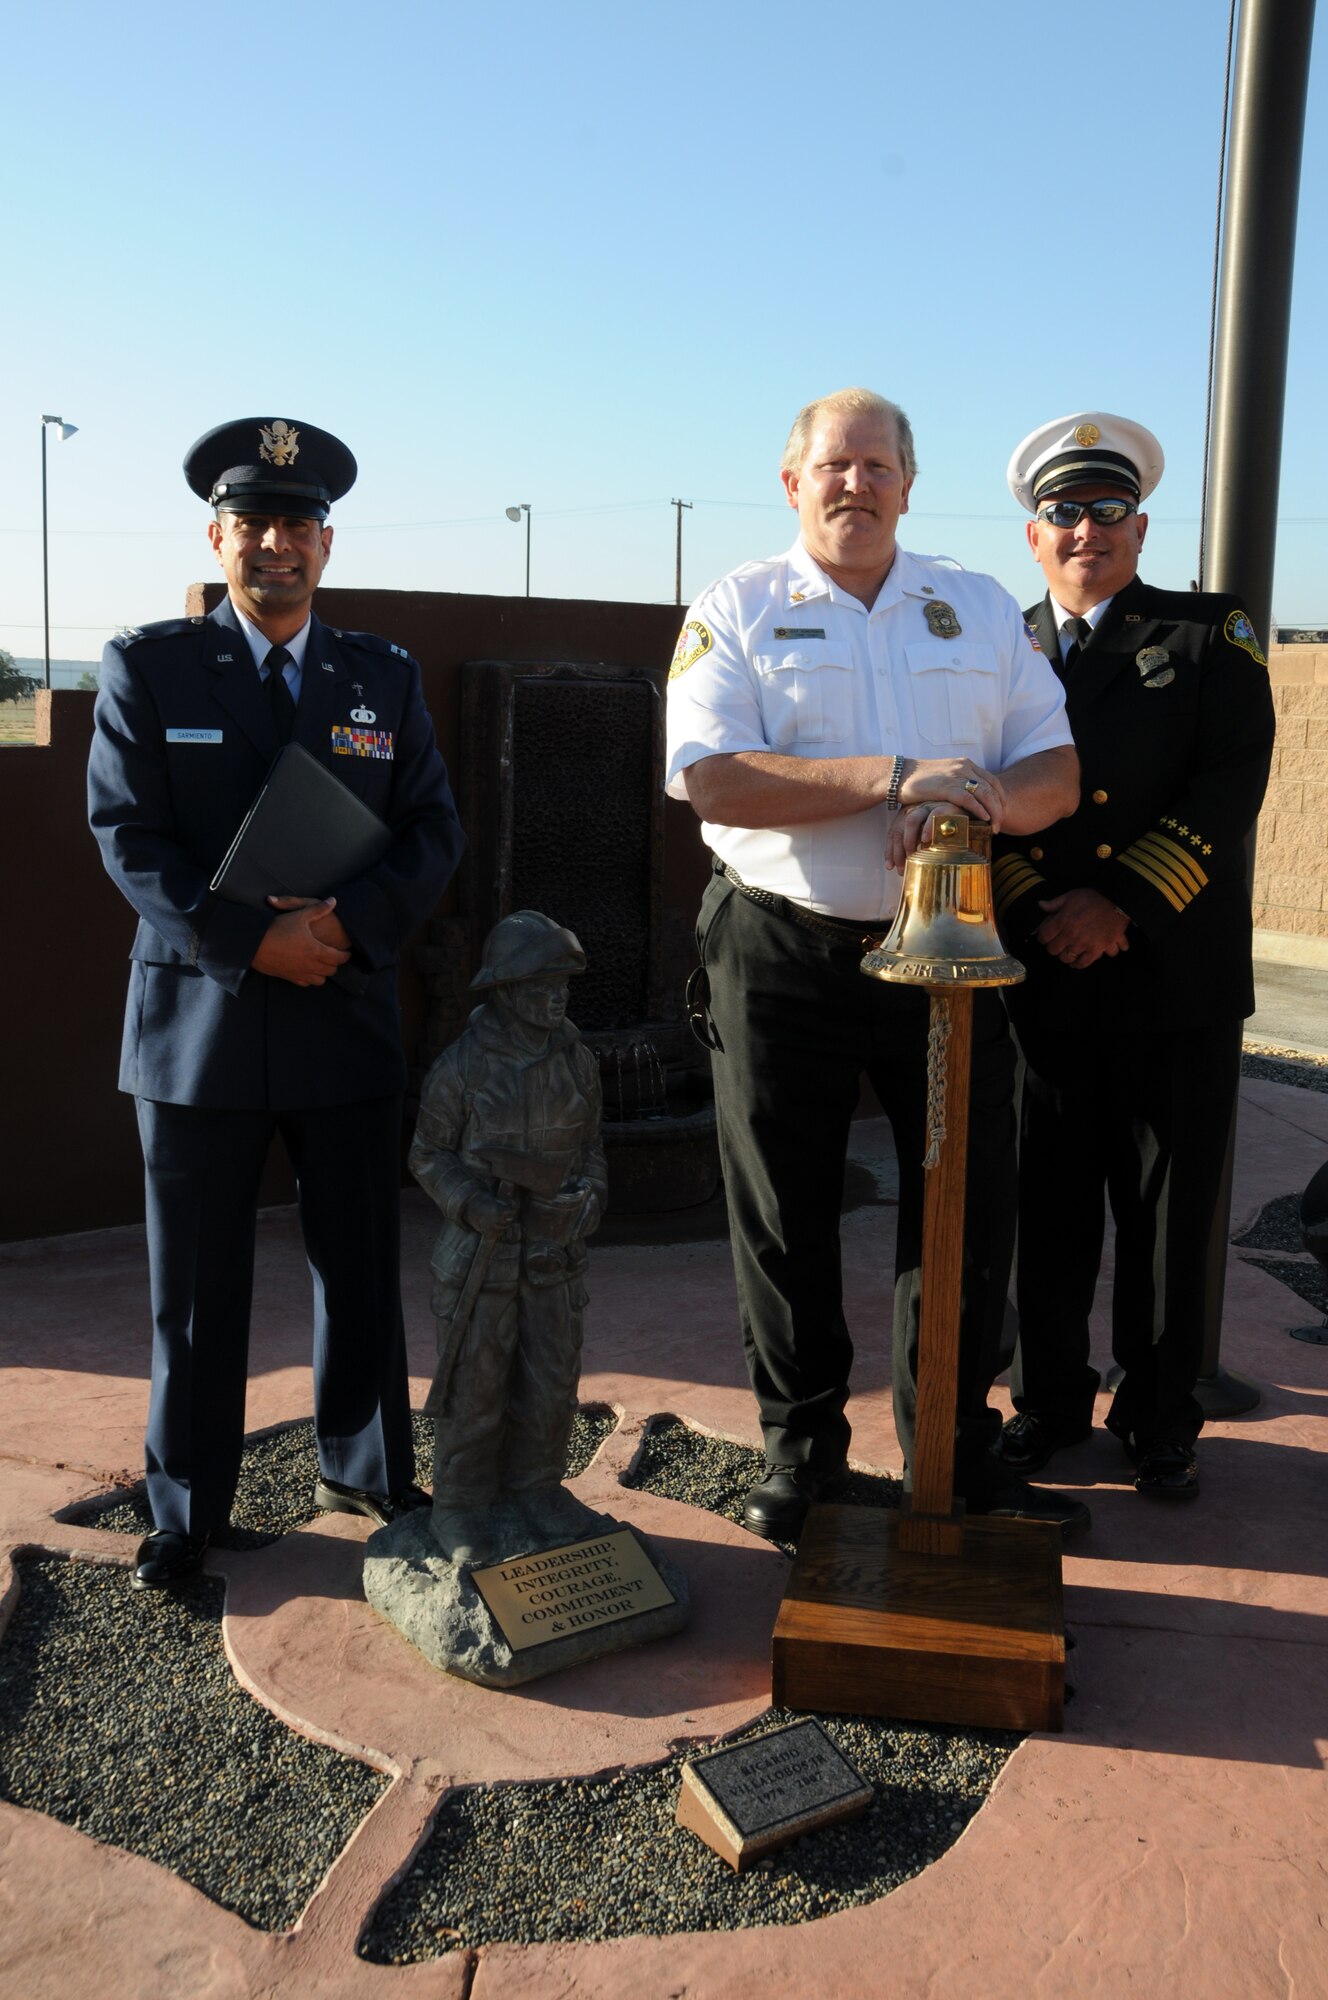 Firefighters at March Air Reserve Base held a ceremony in remembrance of September 11, 2001 in front of their new 9/11 memorial, September 11, 2010. (U.S. Air Force photo by MSgt Julie Avey)